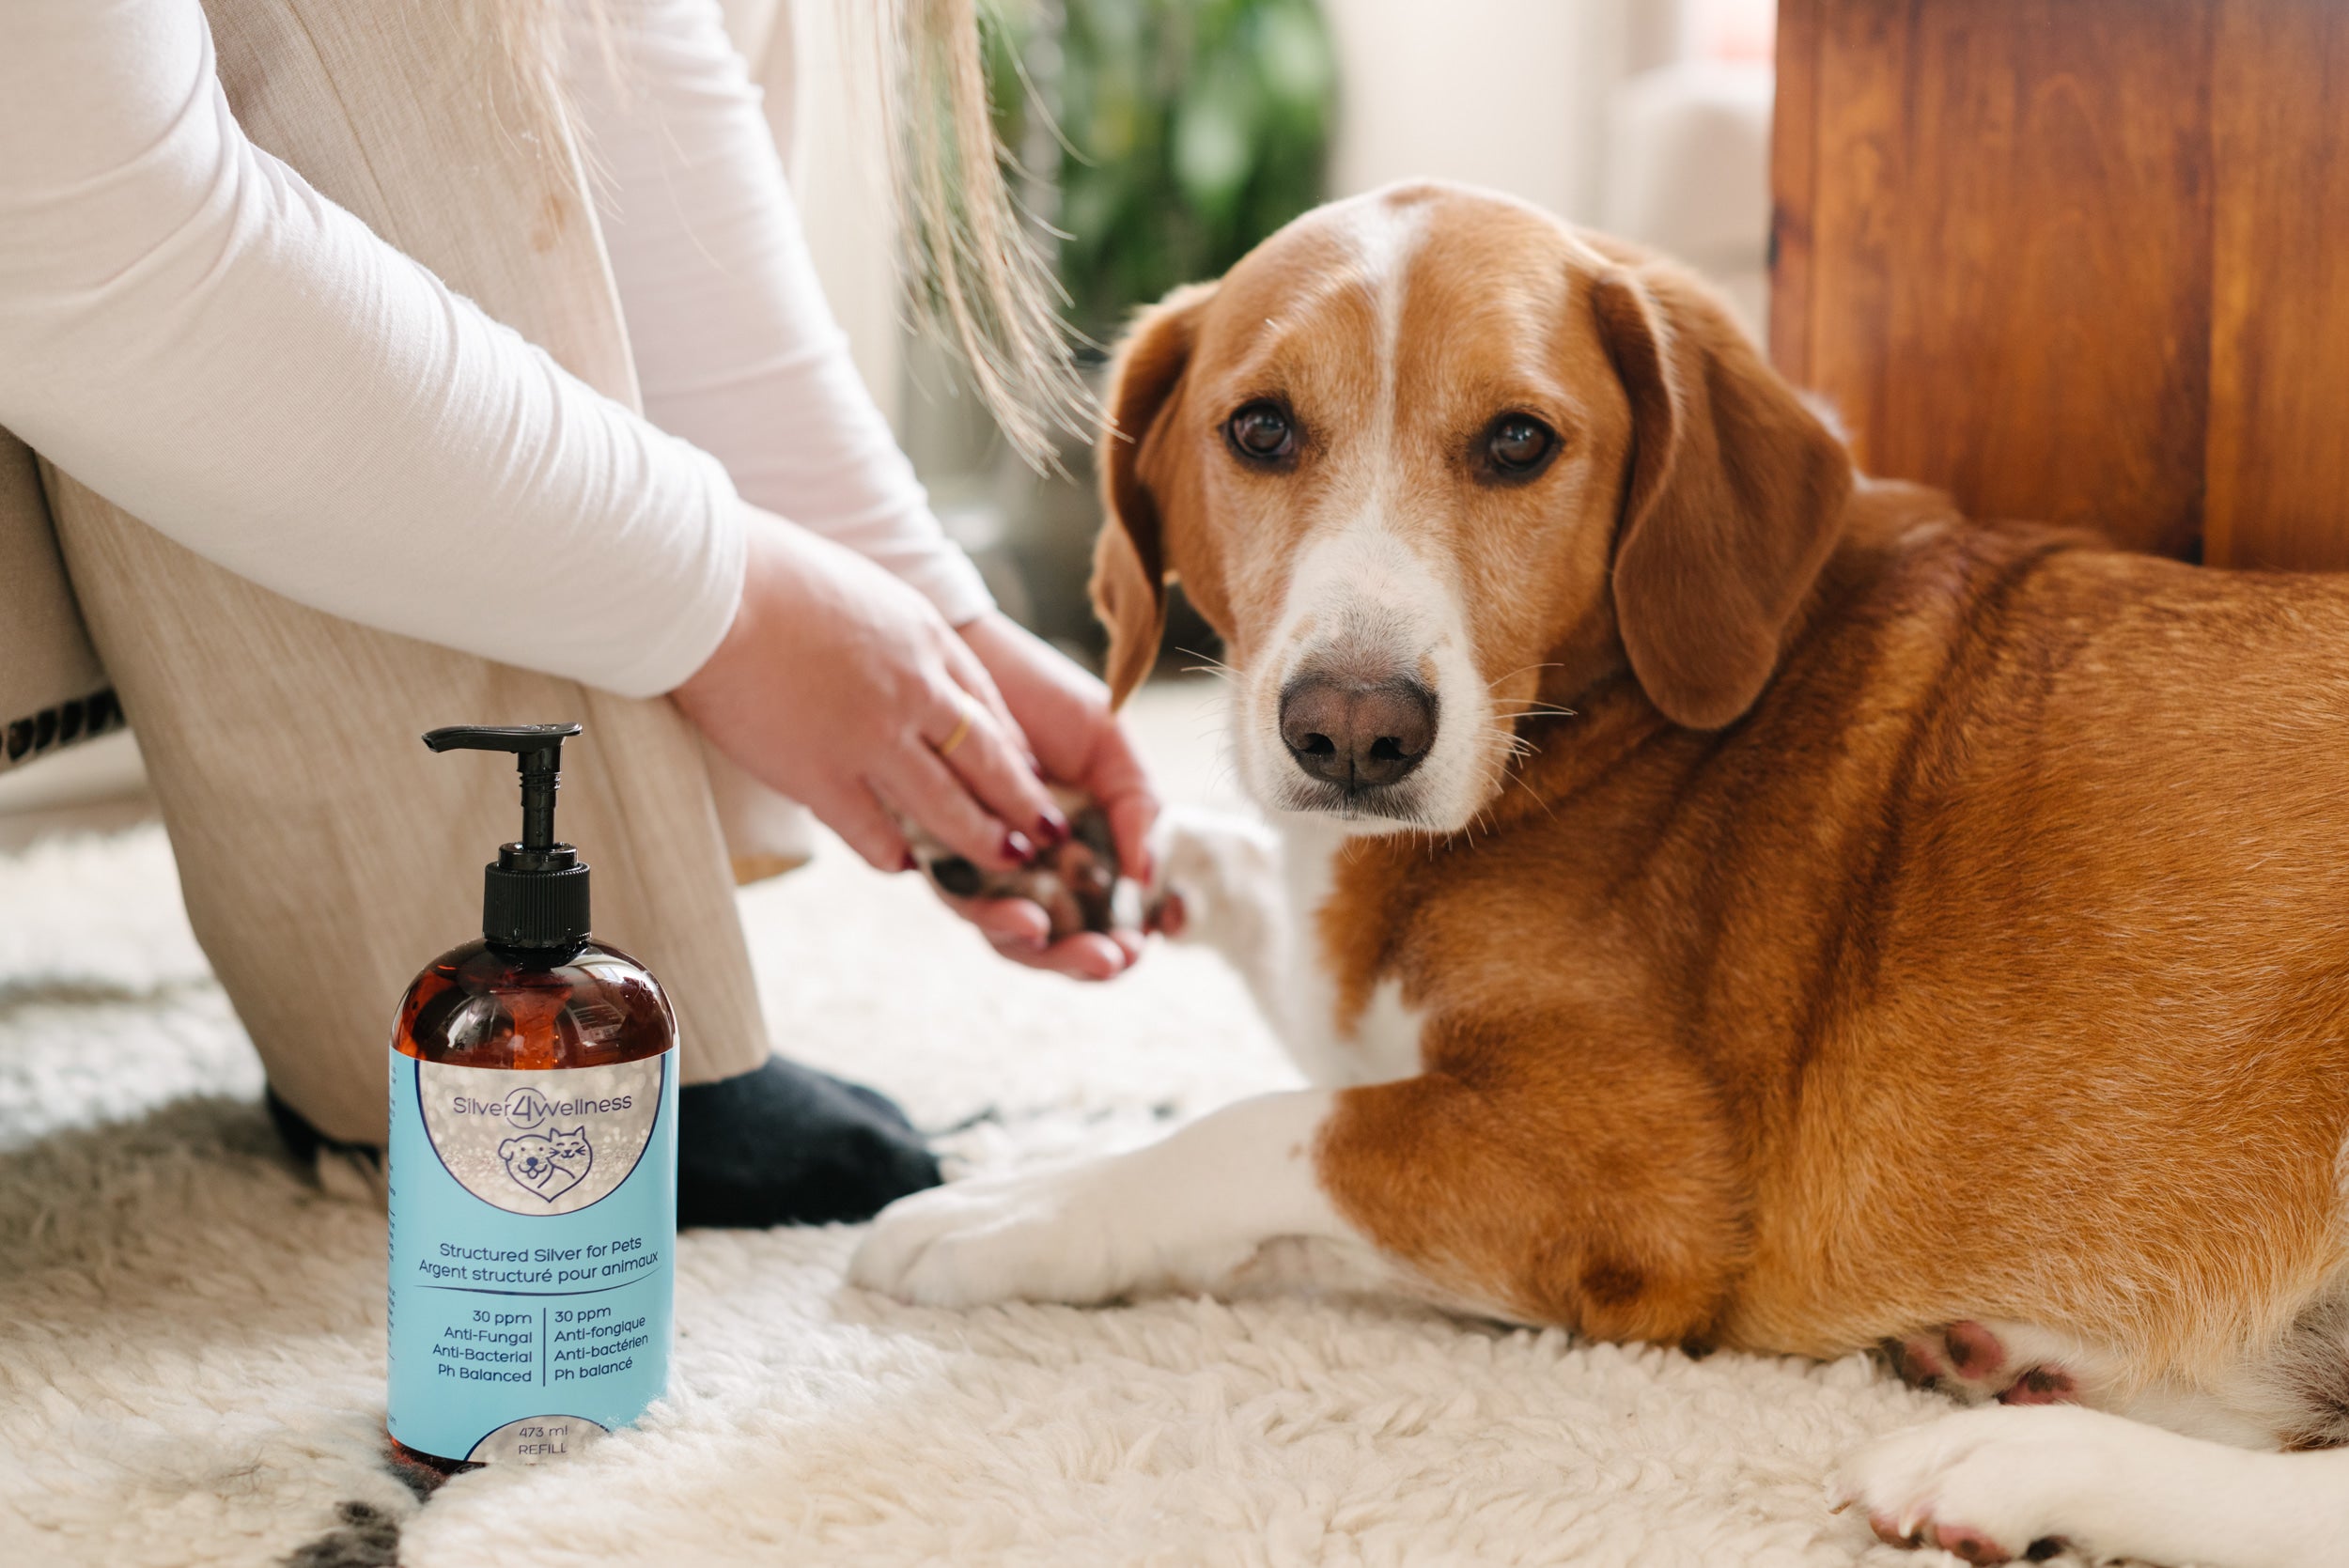 A Silver4Wellness refill-sized bottle with pump sits in the foreground, labeled 'Structured Silver for pets'. In the background, a person gently holds the paw of a calm, attentive brown dog, ready for its wellness treatment.